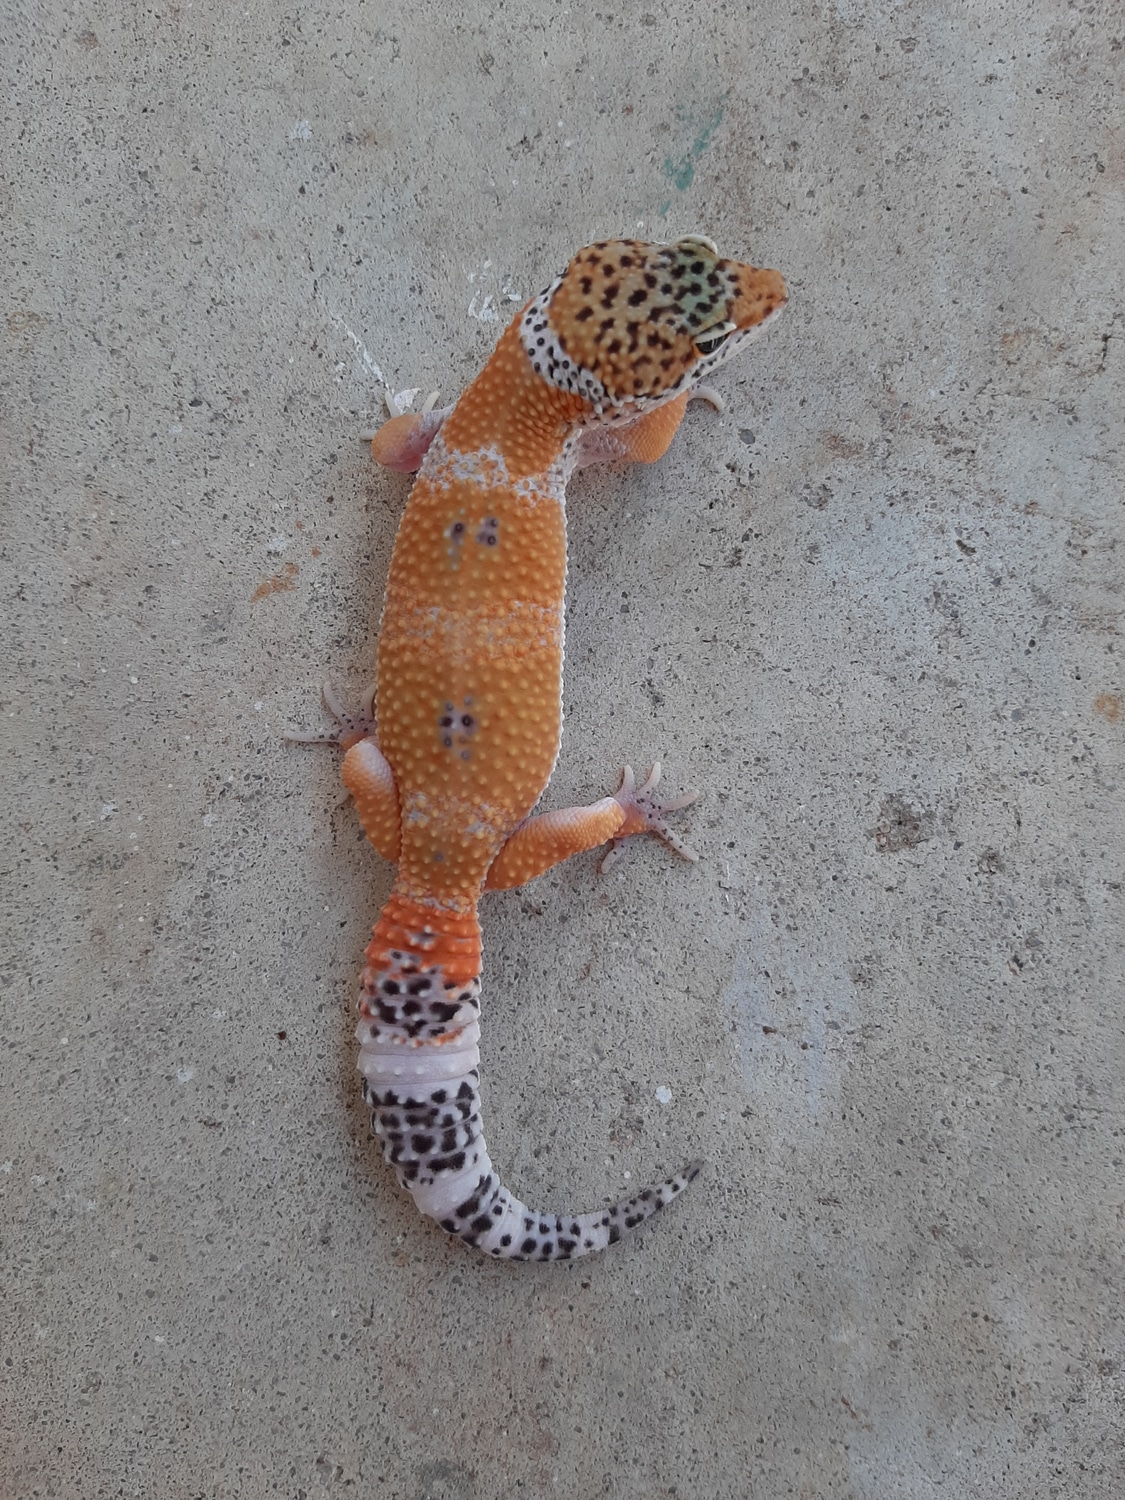 Black Night/Black Pearl/Charcoal/Inferno/Red Stripe Mack Snow Cross Ph Murphy Patternless Leopard Gecko by Scaled Art Reptiles